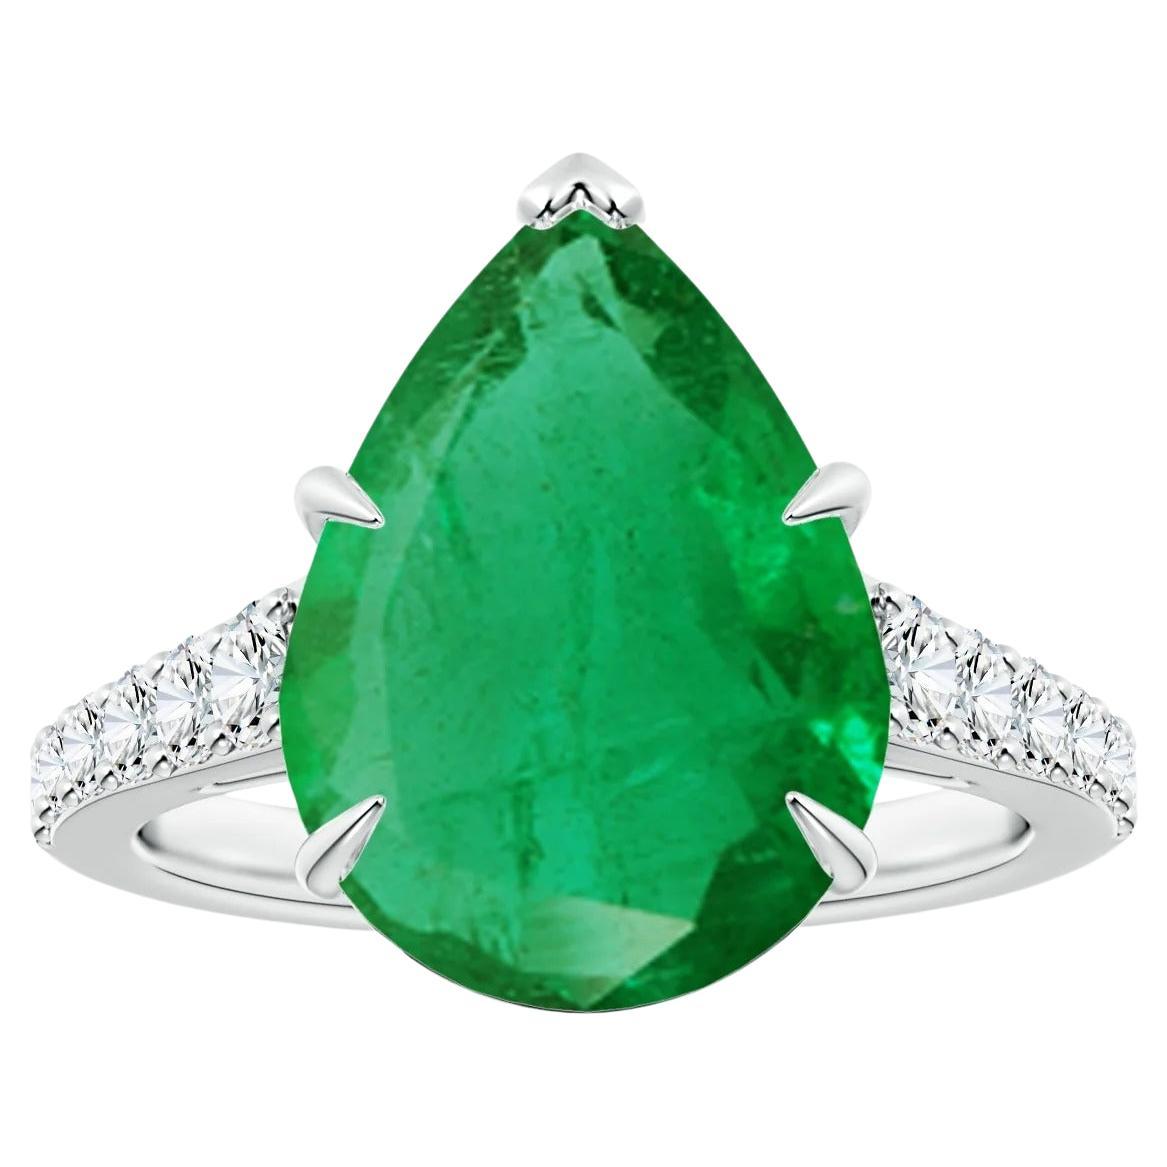 For Sale:  Angara Gia Certified Pear-Shaped Emerald Ring in White Gold with Diamonds